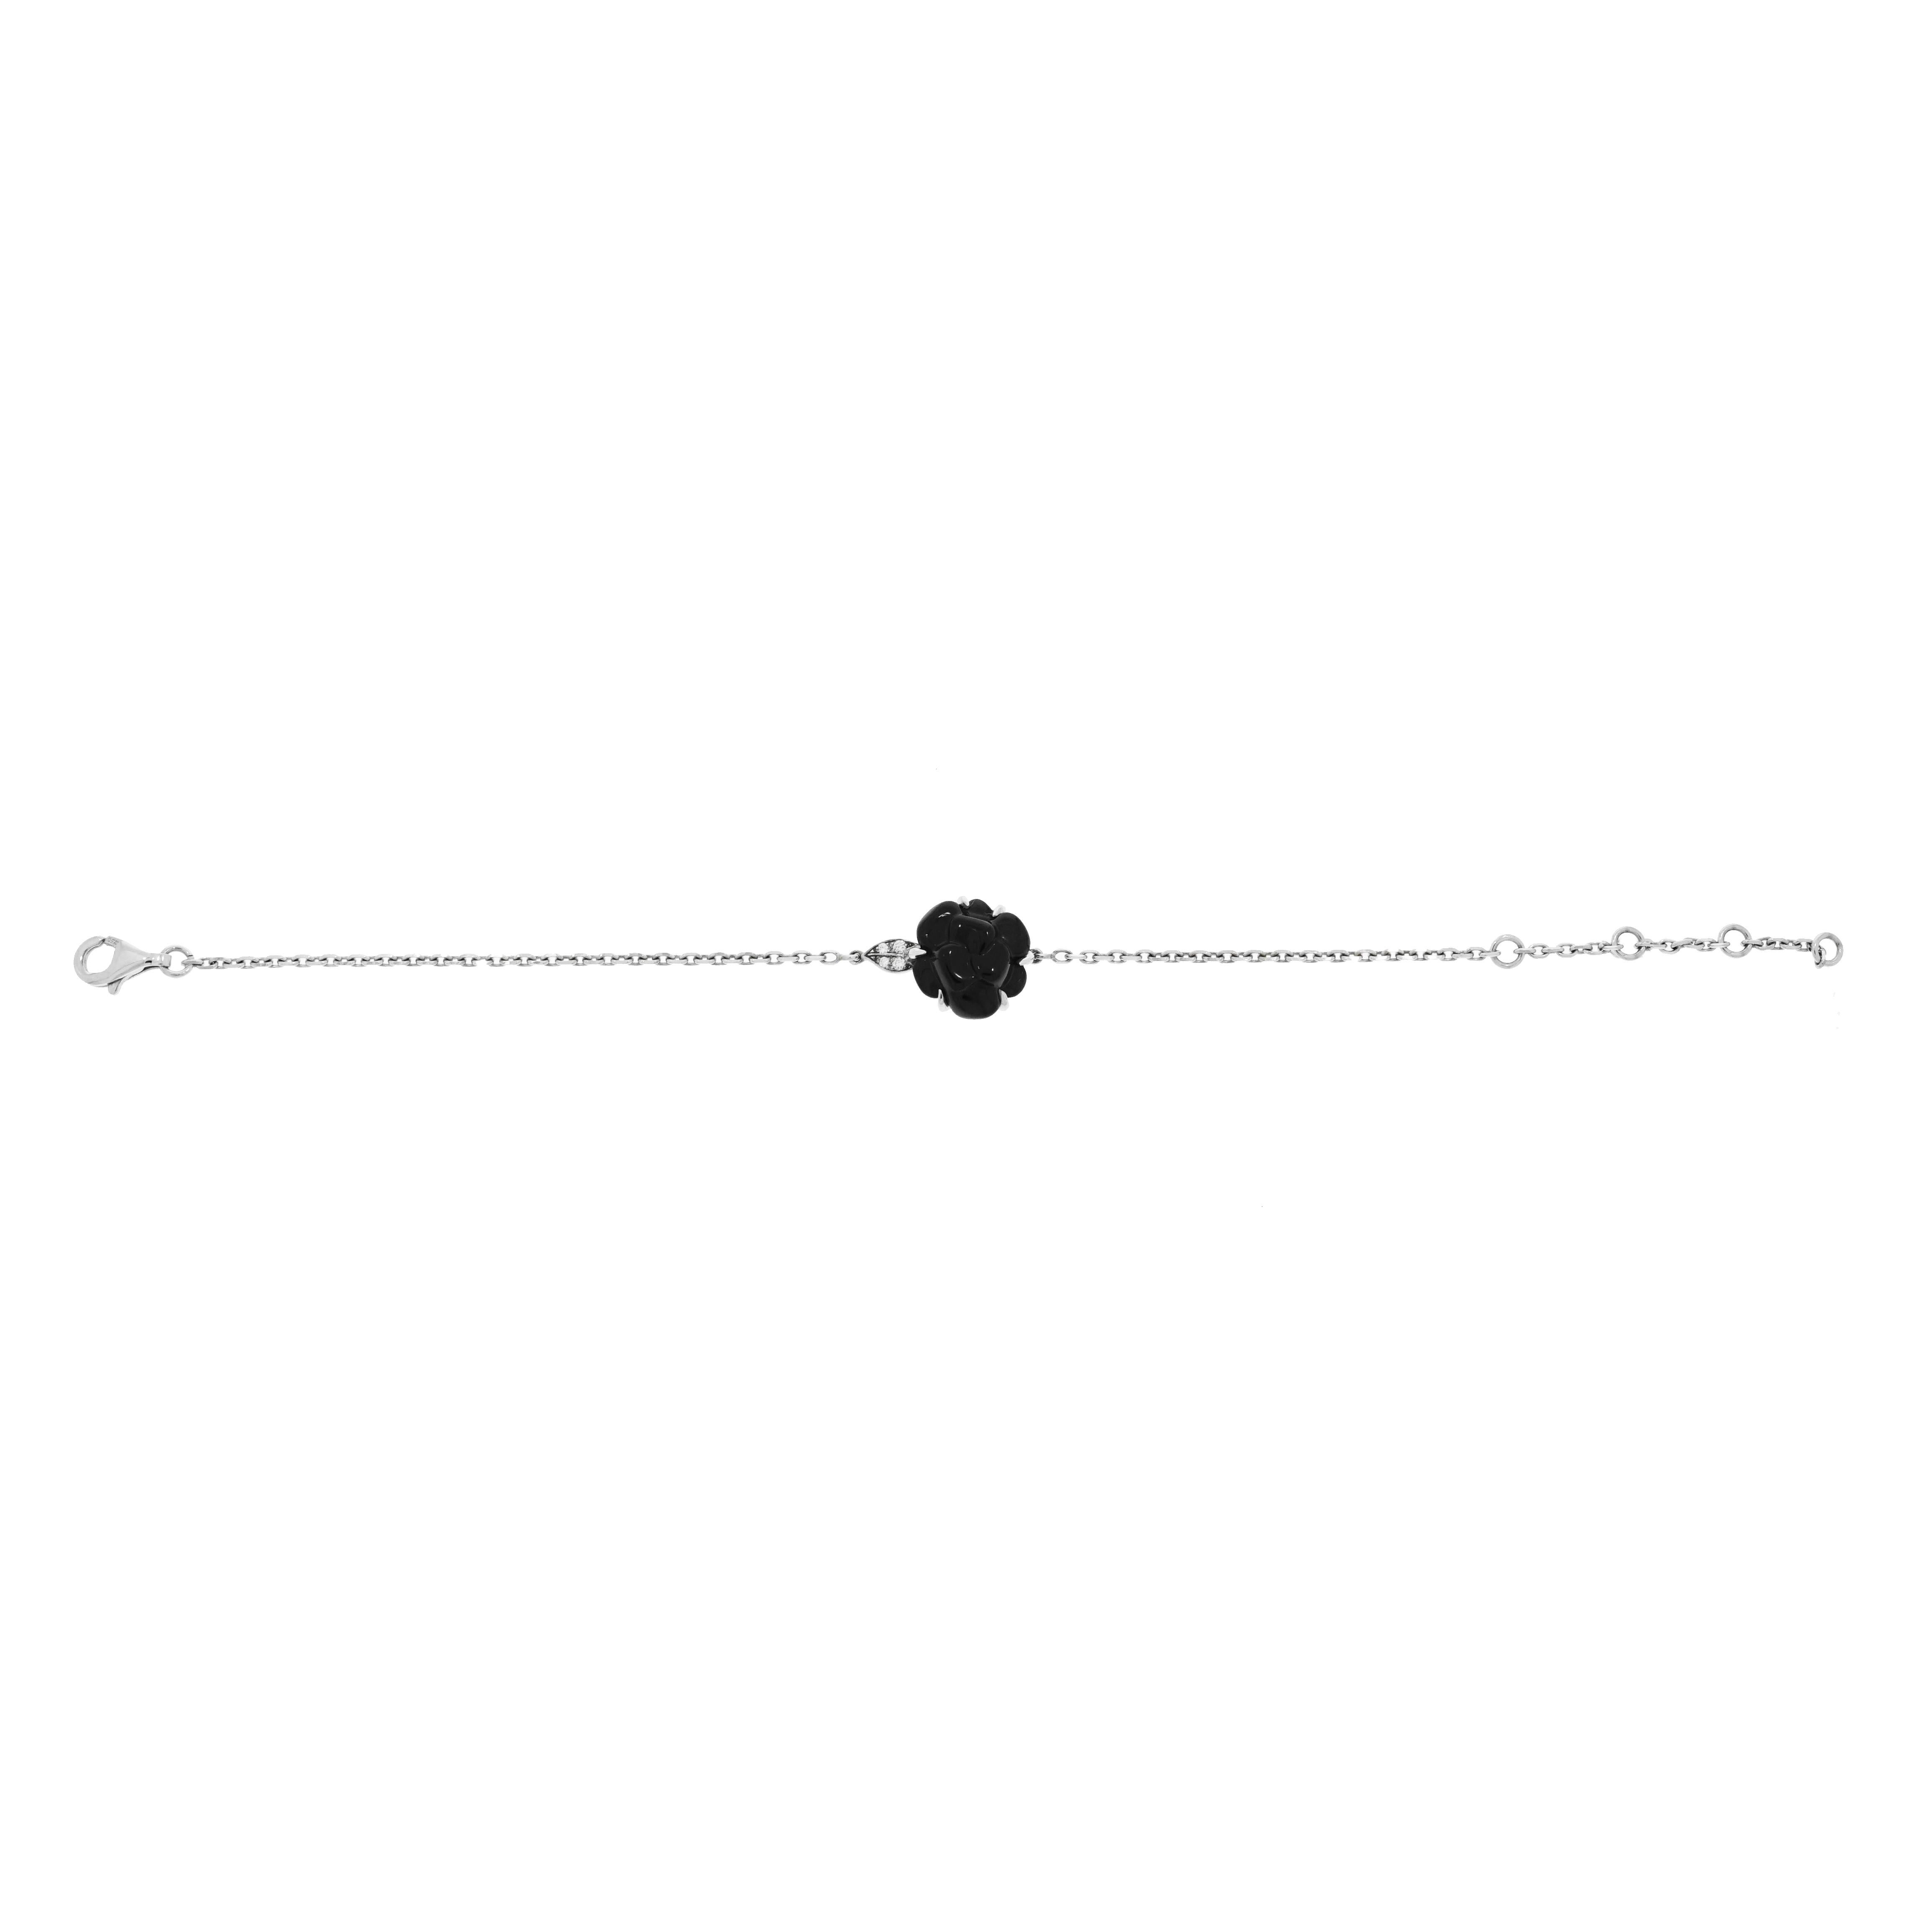 The classic Camélia Sculpté bracelet by Chanel.
Crafted in 18K white gold and a carved black onyx and accented with diamonds.